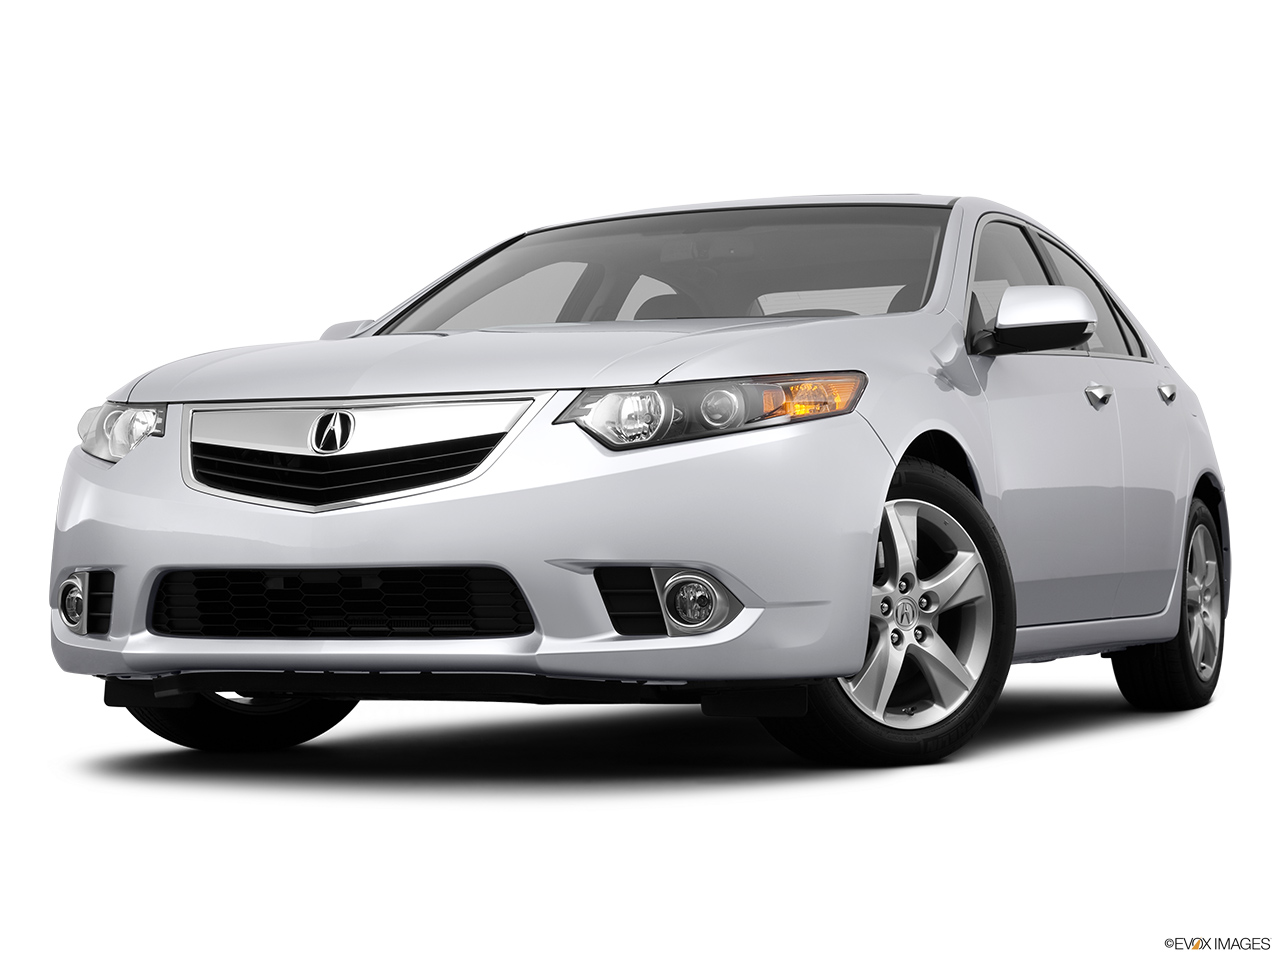 2013 Acura TSX 5-speed Automatic Front angle view, low wide perspective. 